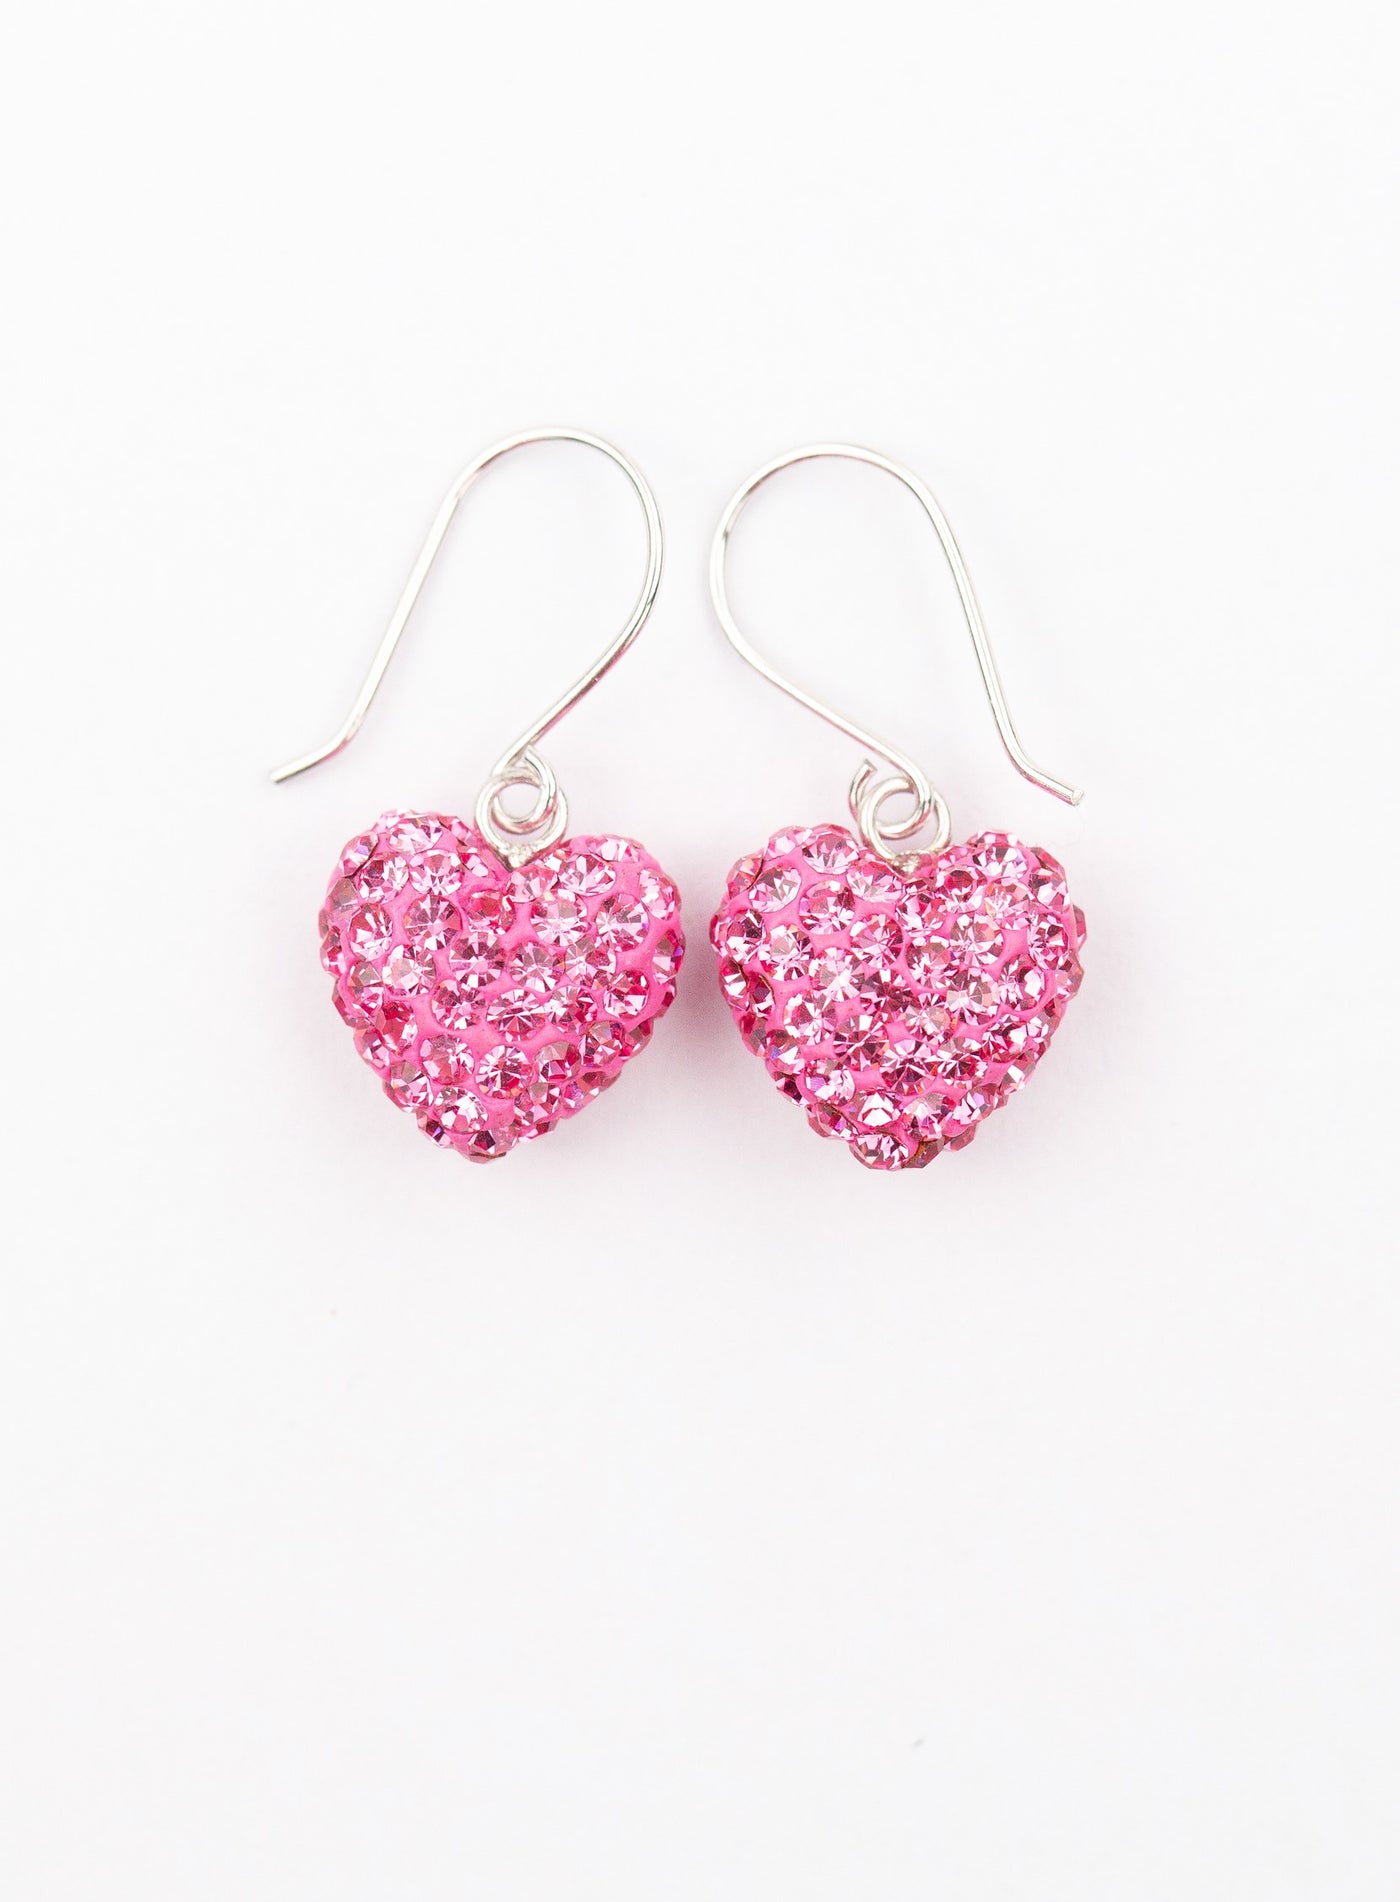 Mini All Over Crystal Pave Heart Silver Earrings in Rose Pink | Annie and Sisters